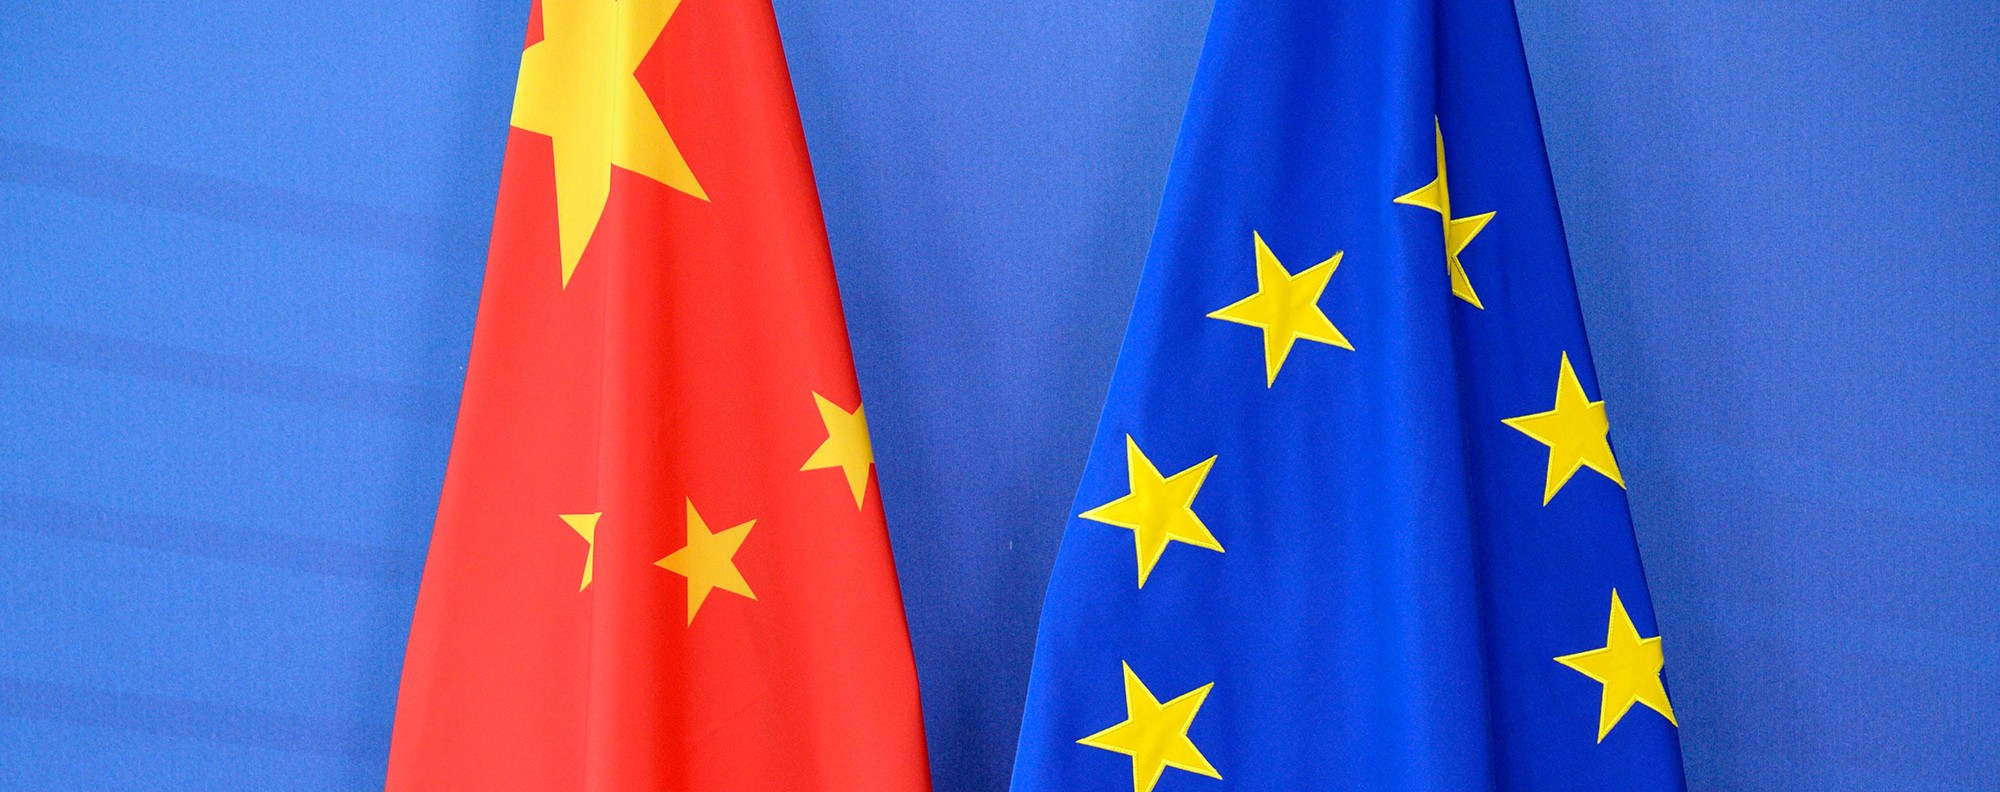 The Chinese flag is draped beside the European Union flag during a EU-China Summit at the European Union Commission headquarters in Brussels. Photo: AFP